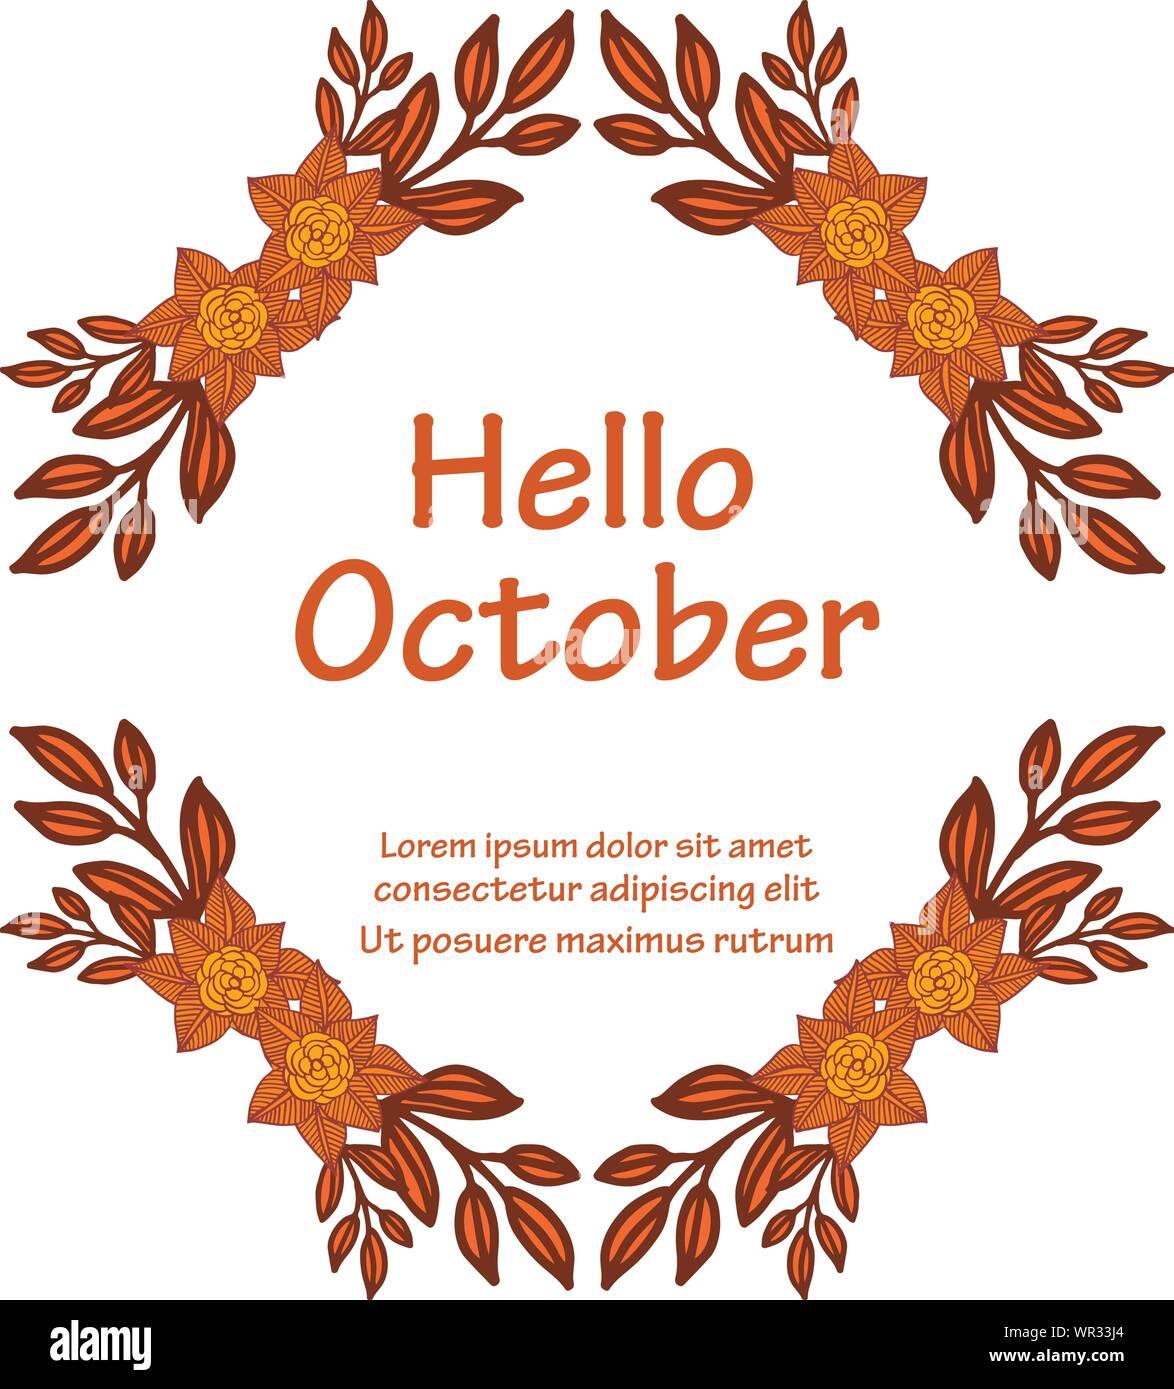 Handwritten poster hello october with wallpaper unique leaf